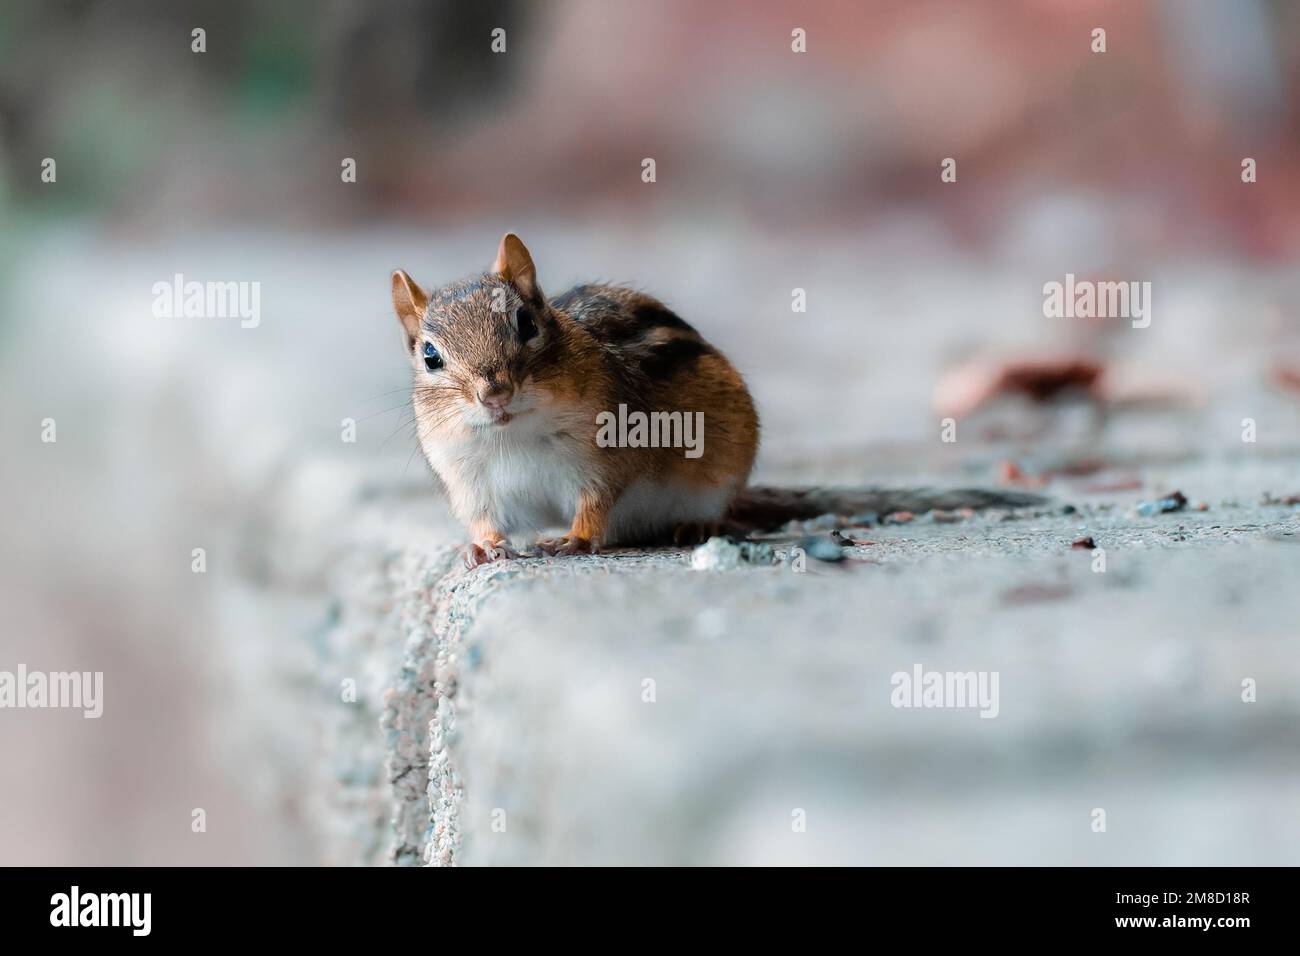 A closeup of the Eastern chipmunk (Tamias striatus) on the ground with a blurry background Stock Photo